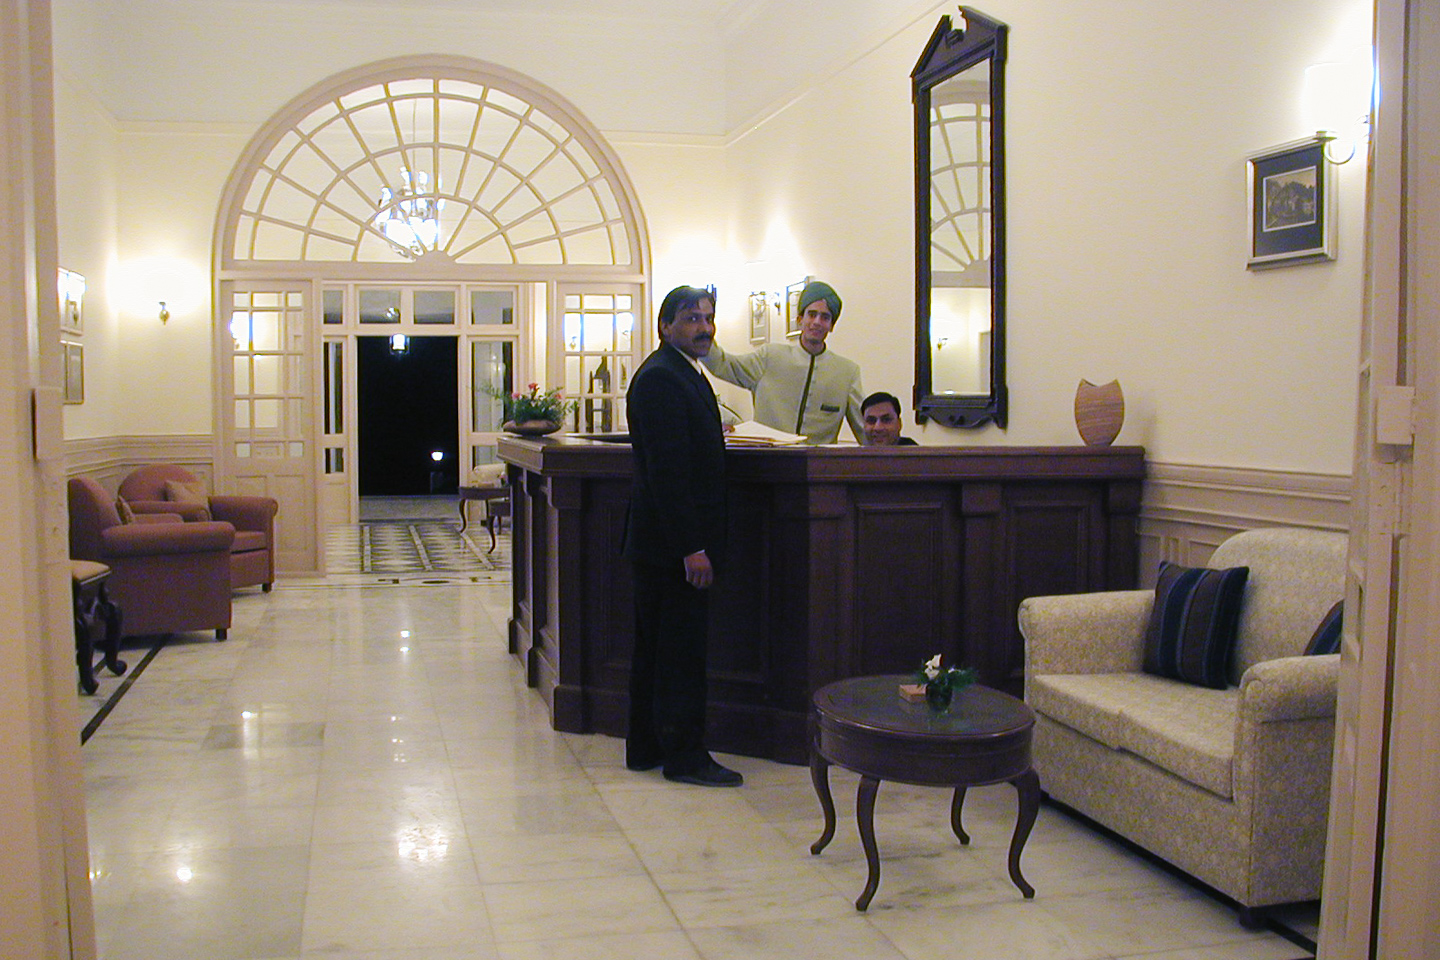 The reception desk in the lobby.